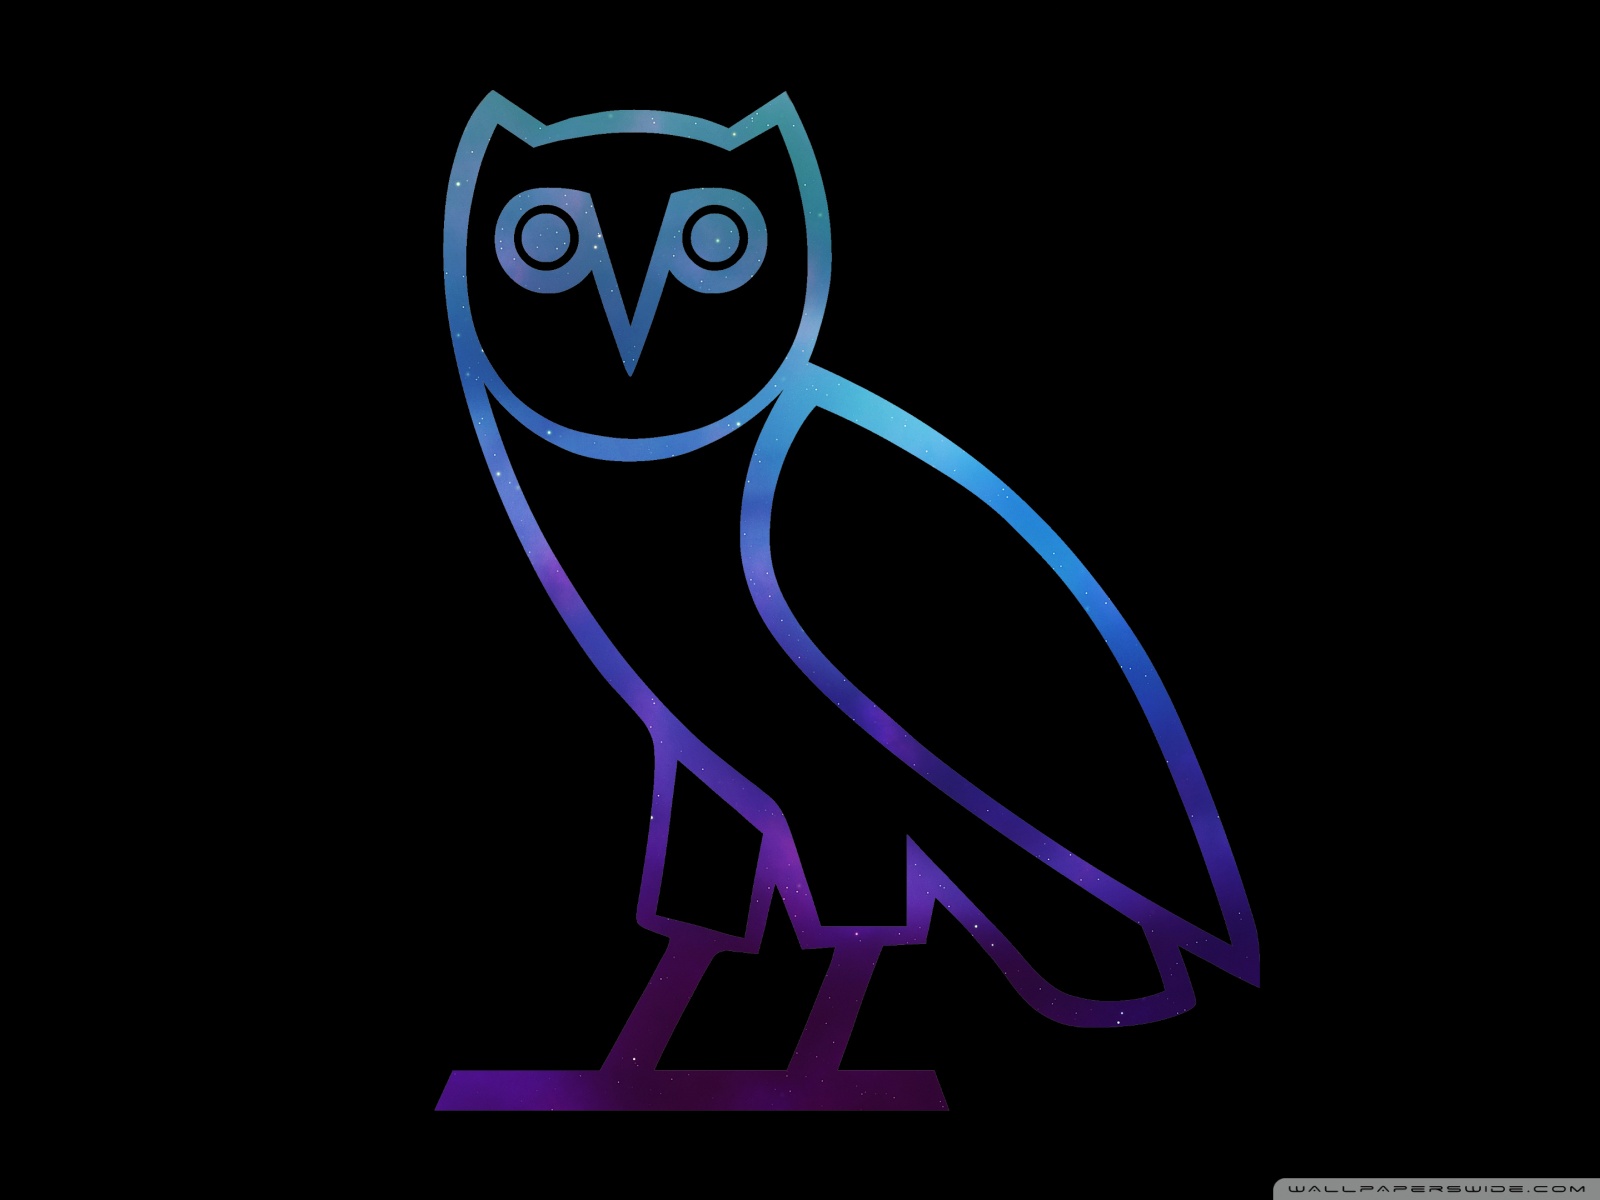 Drake's Eye Tattoo: The Significance of the OVO Owl - wide 5